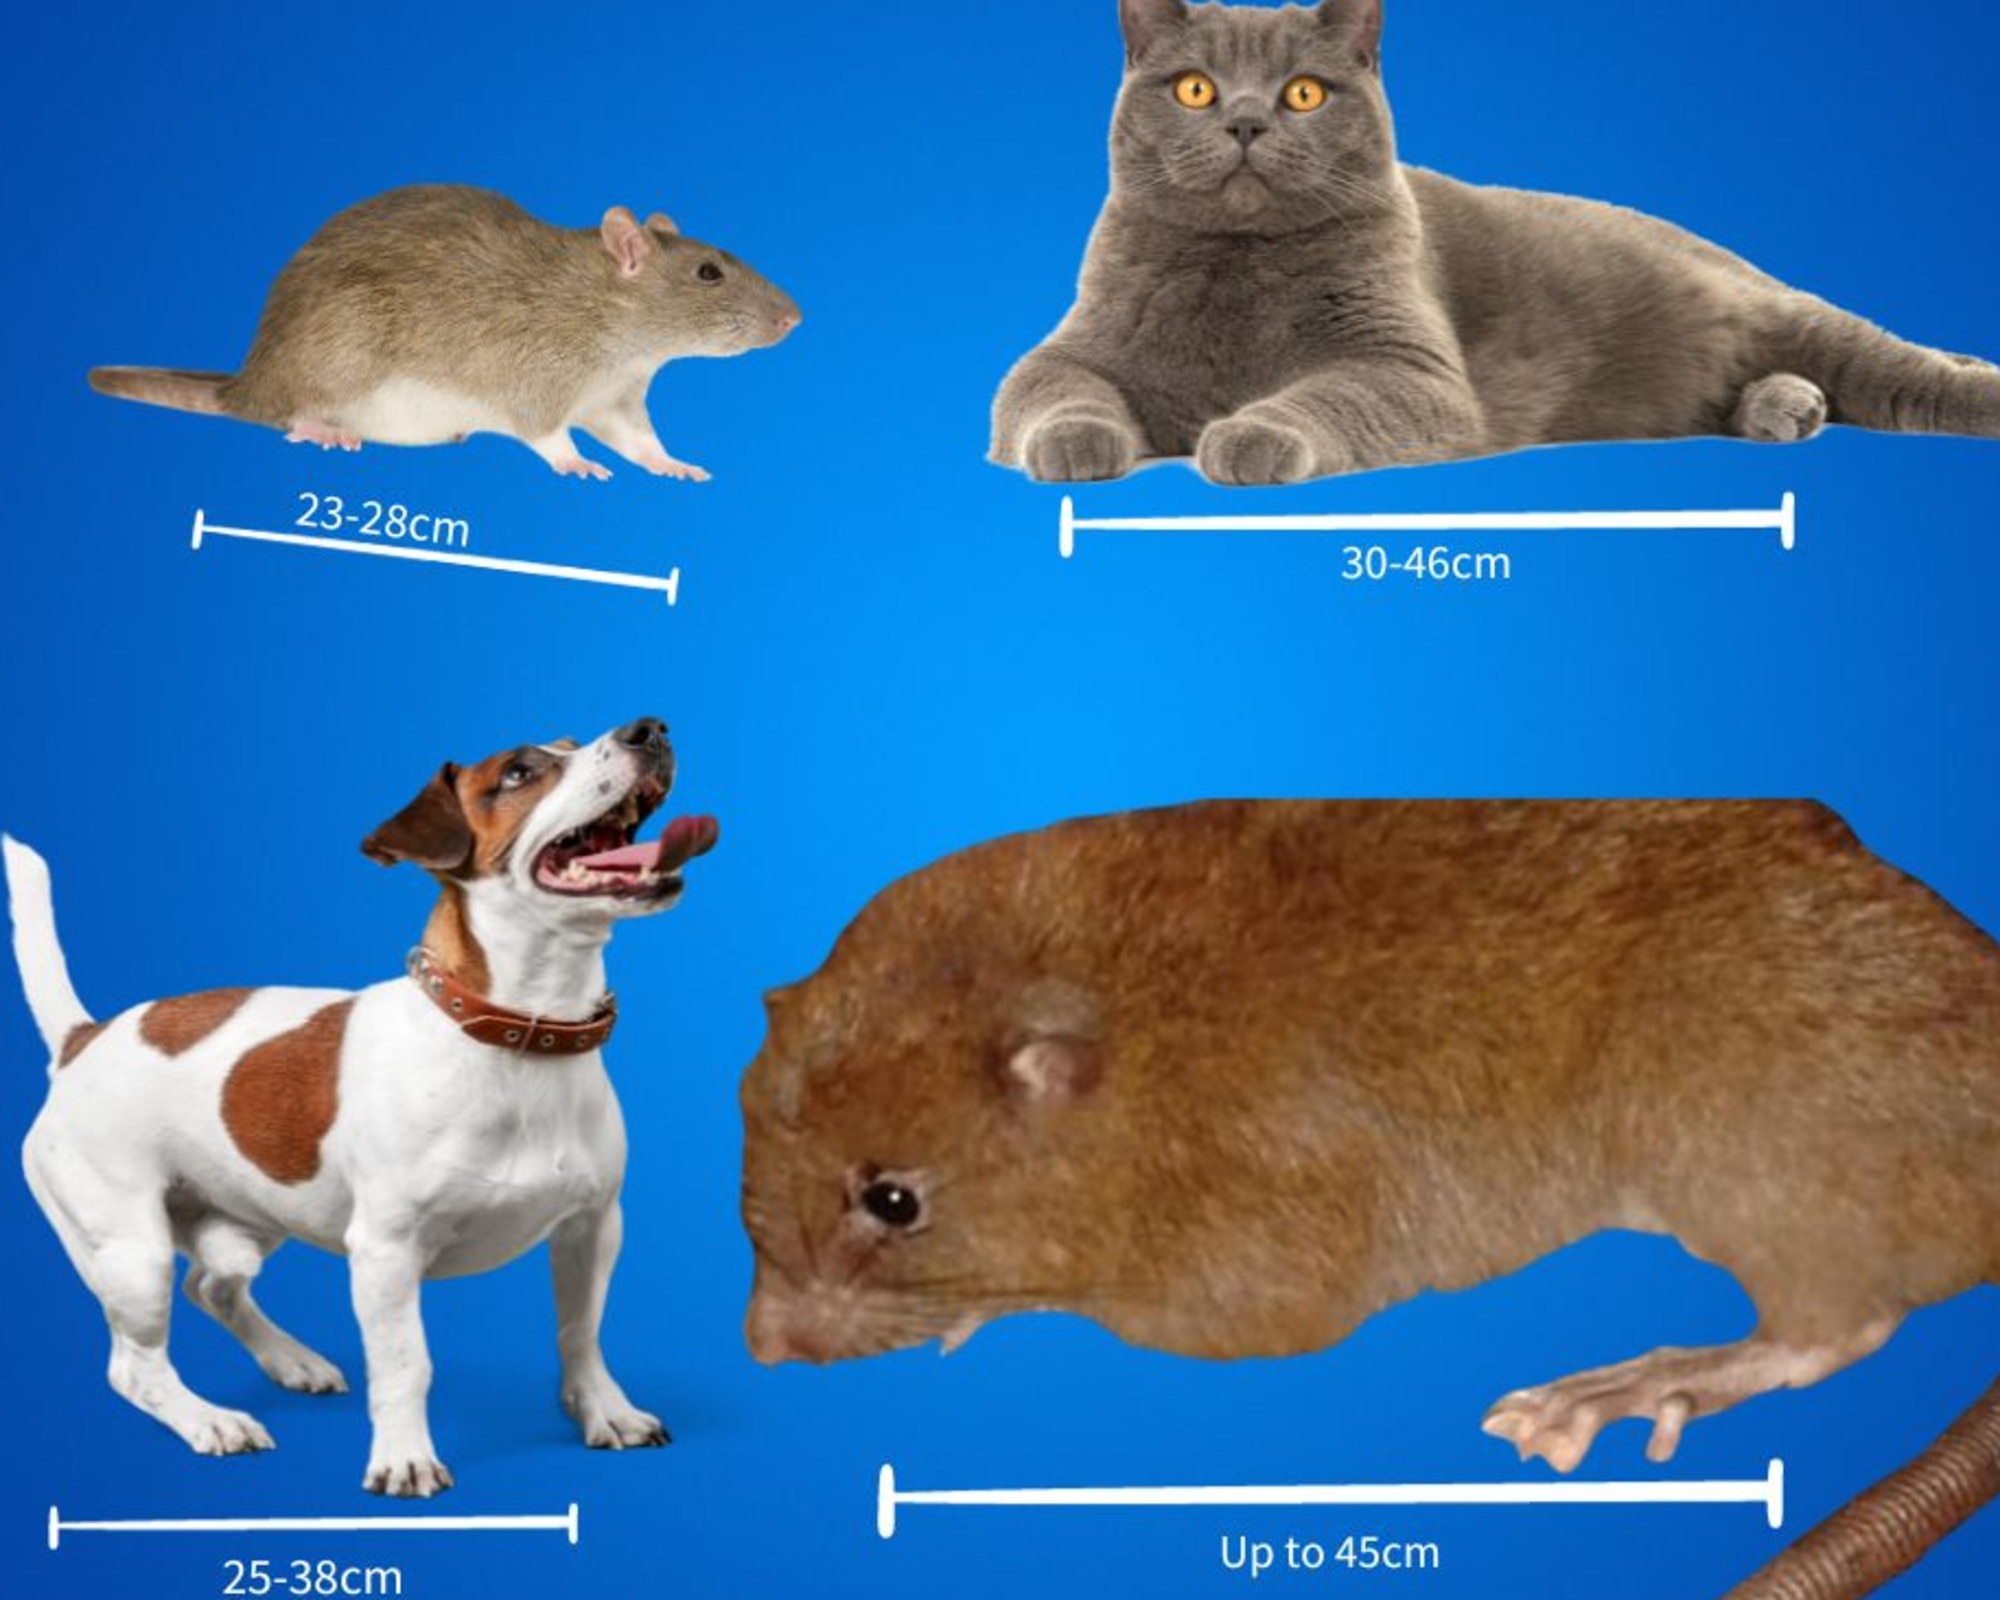 How the giant rat compares to other garden variety animals.